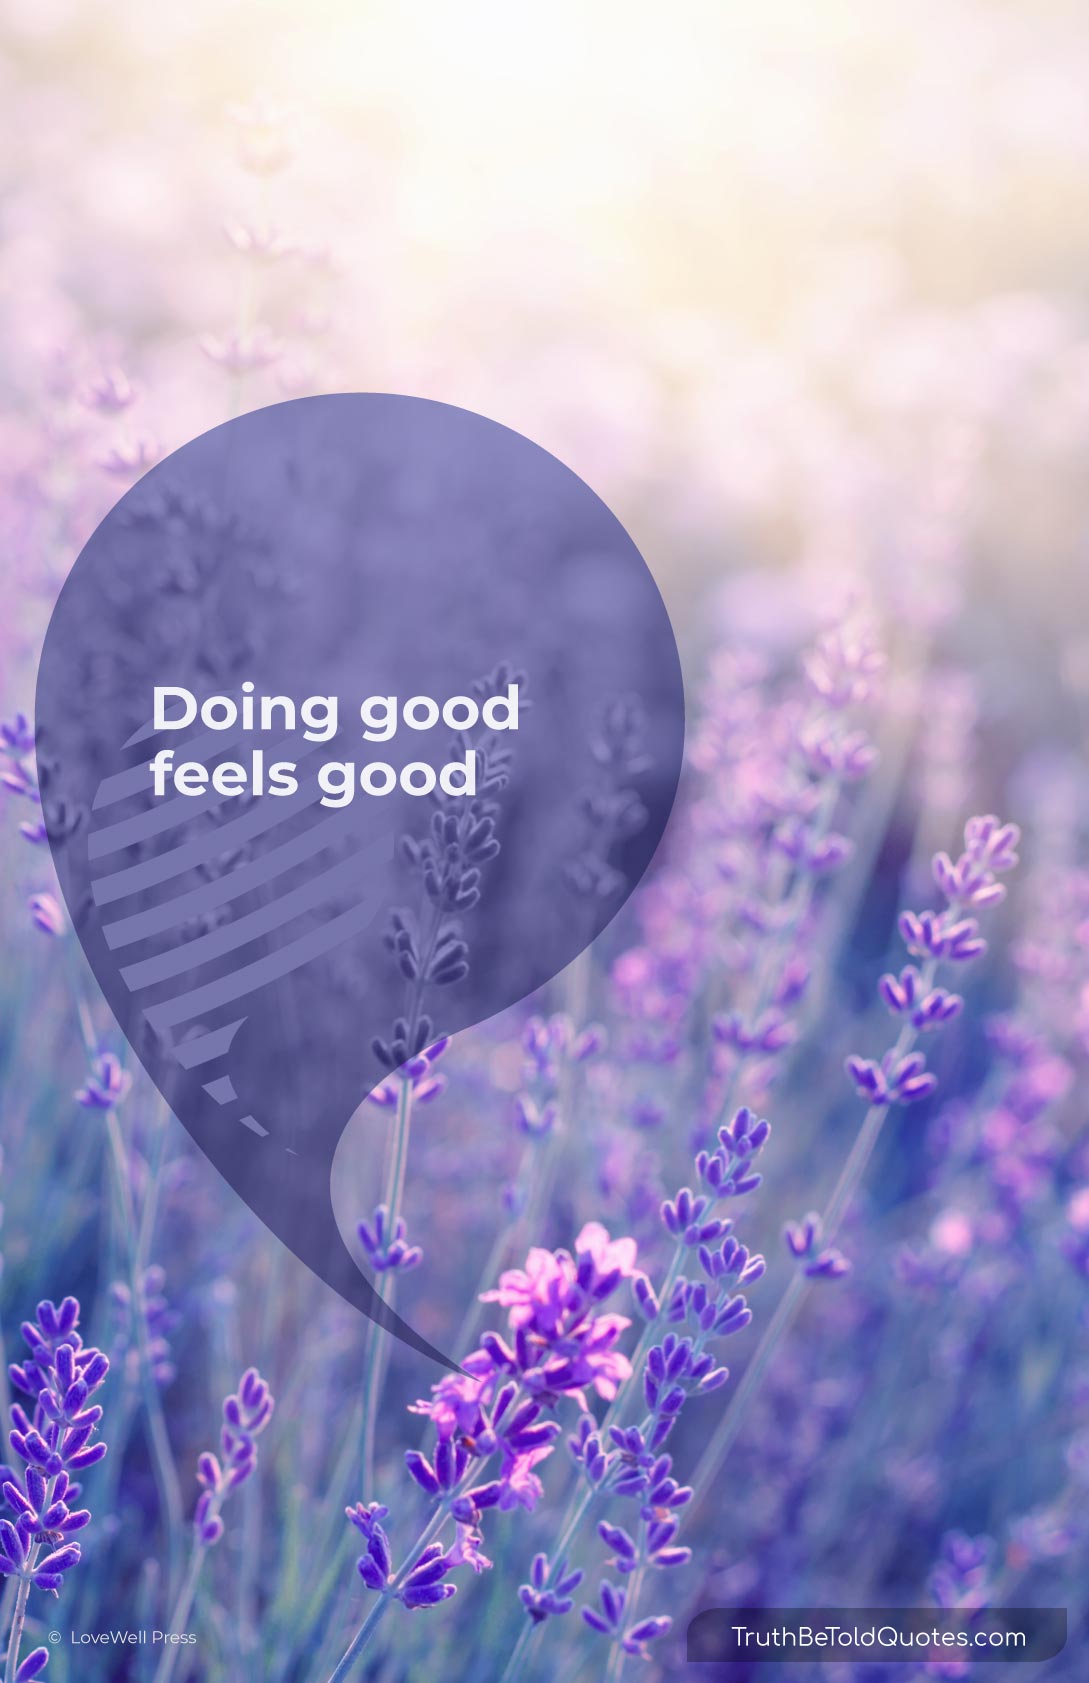 Quote for teens on happiness and conscience -'Doing good feels good'